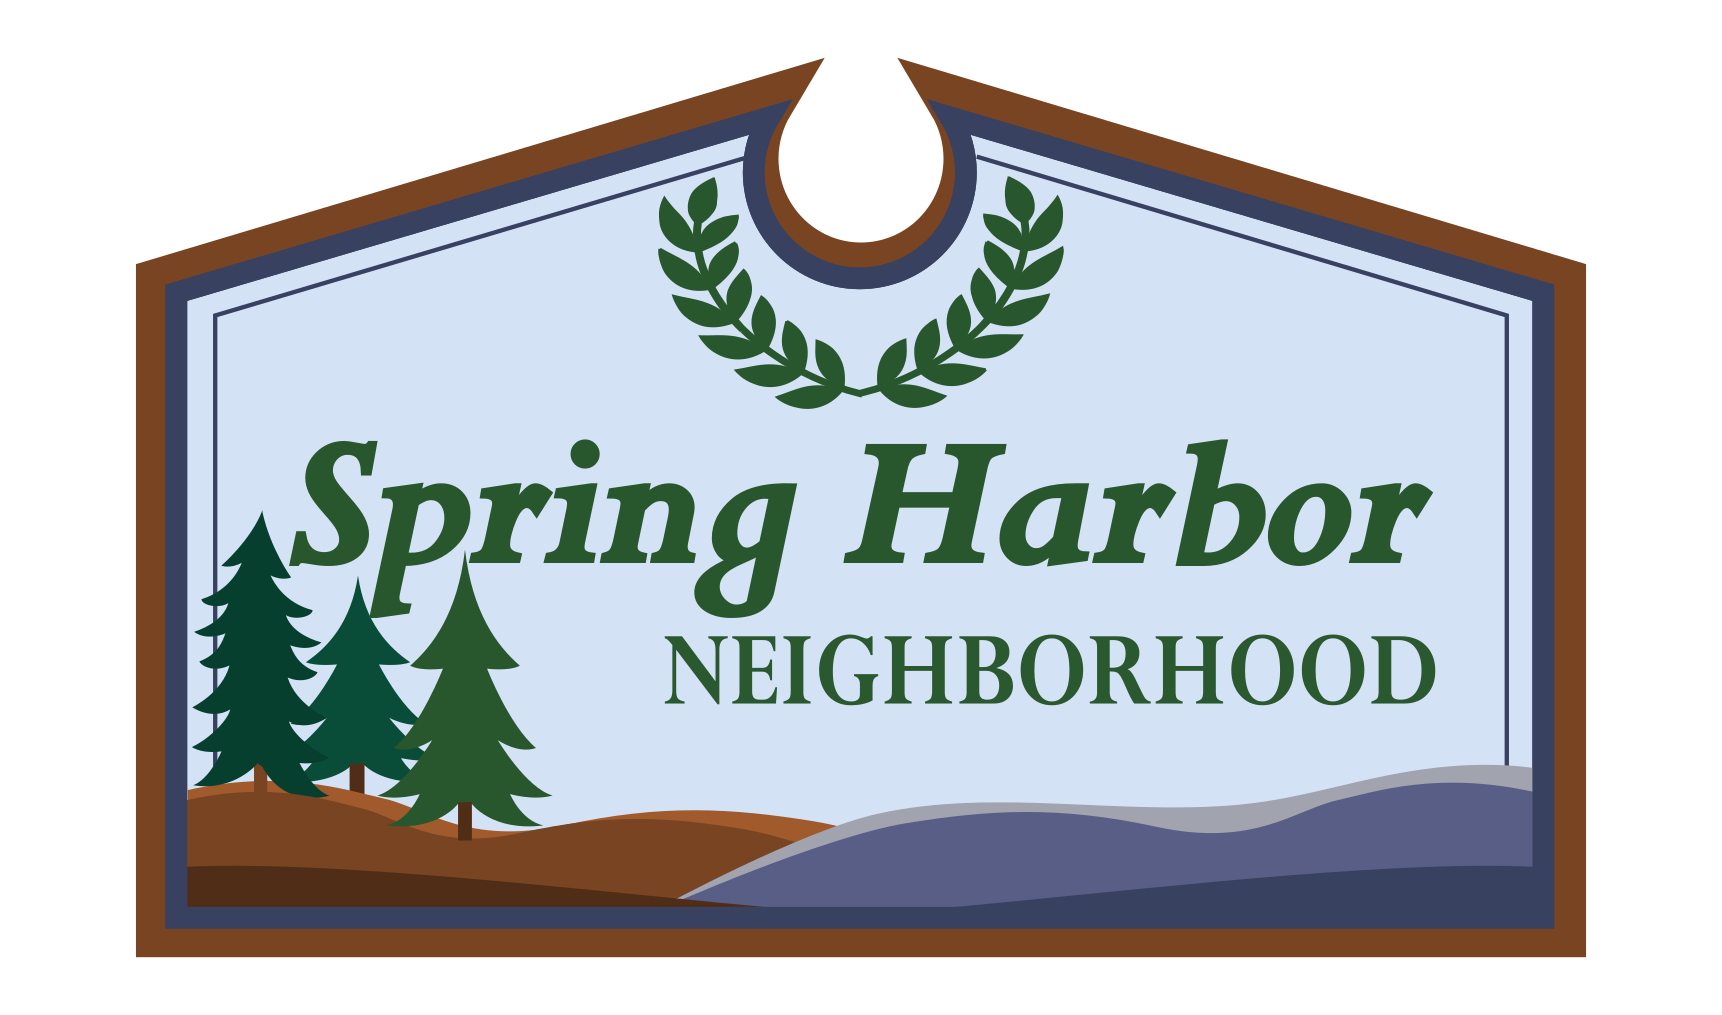 Spring Harbor is More Than Just a Name to This Neighborhood